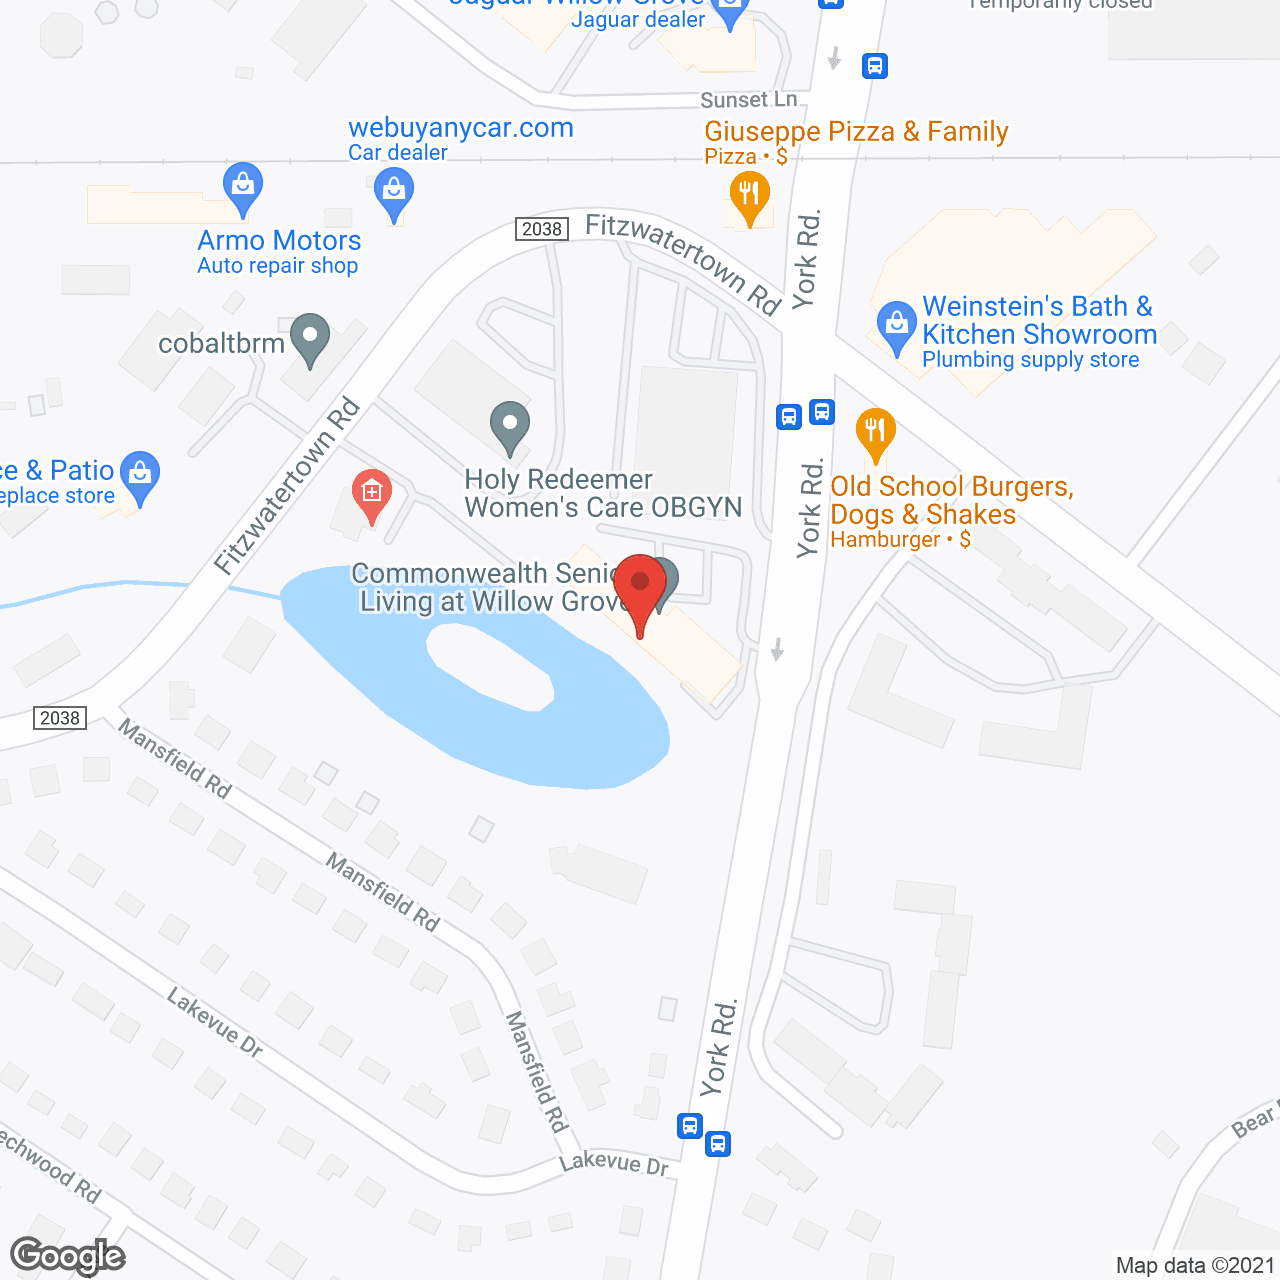 Commonwealth Senior Living at Willow Grove in google map